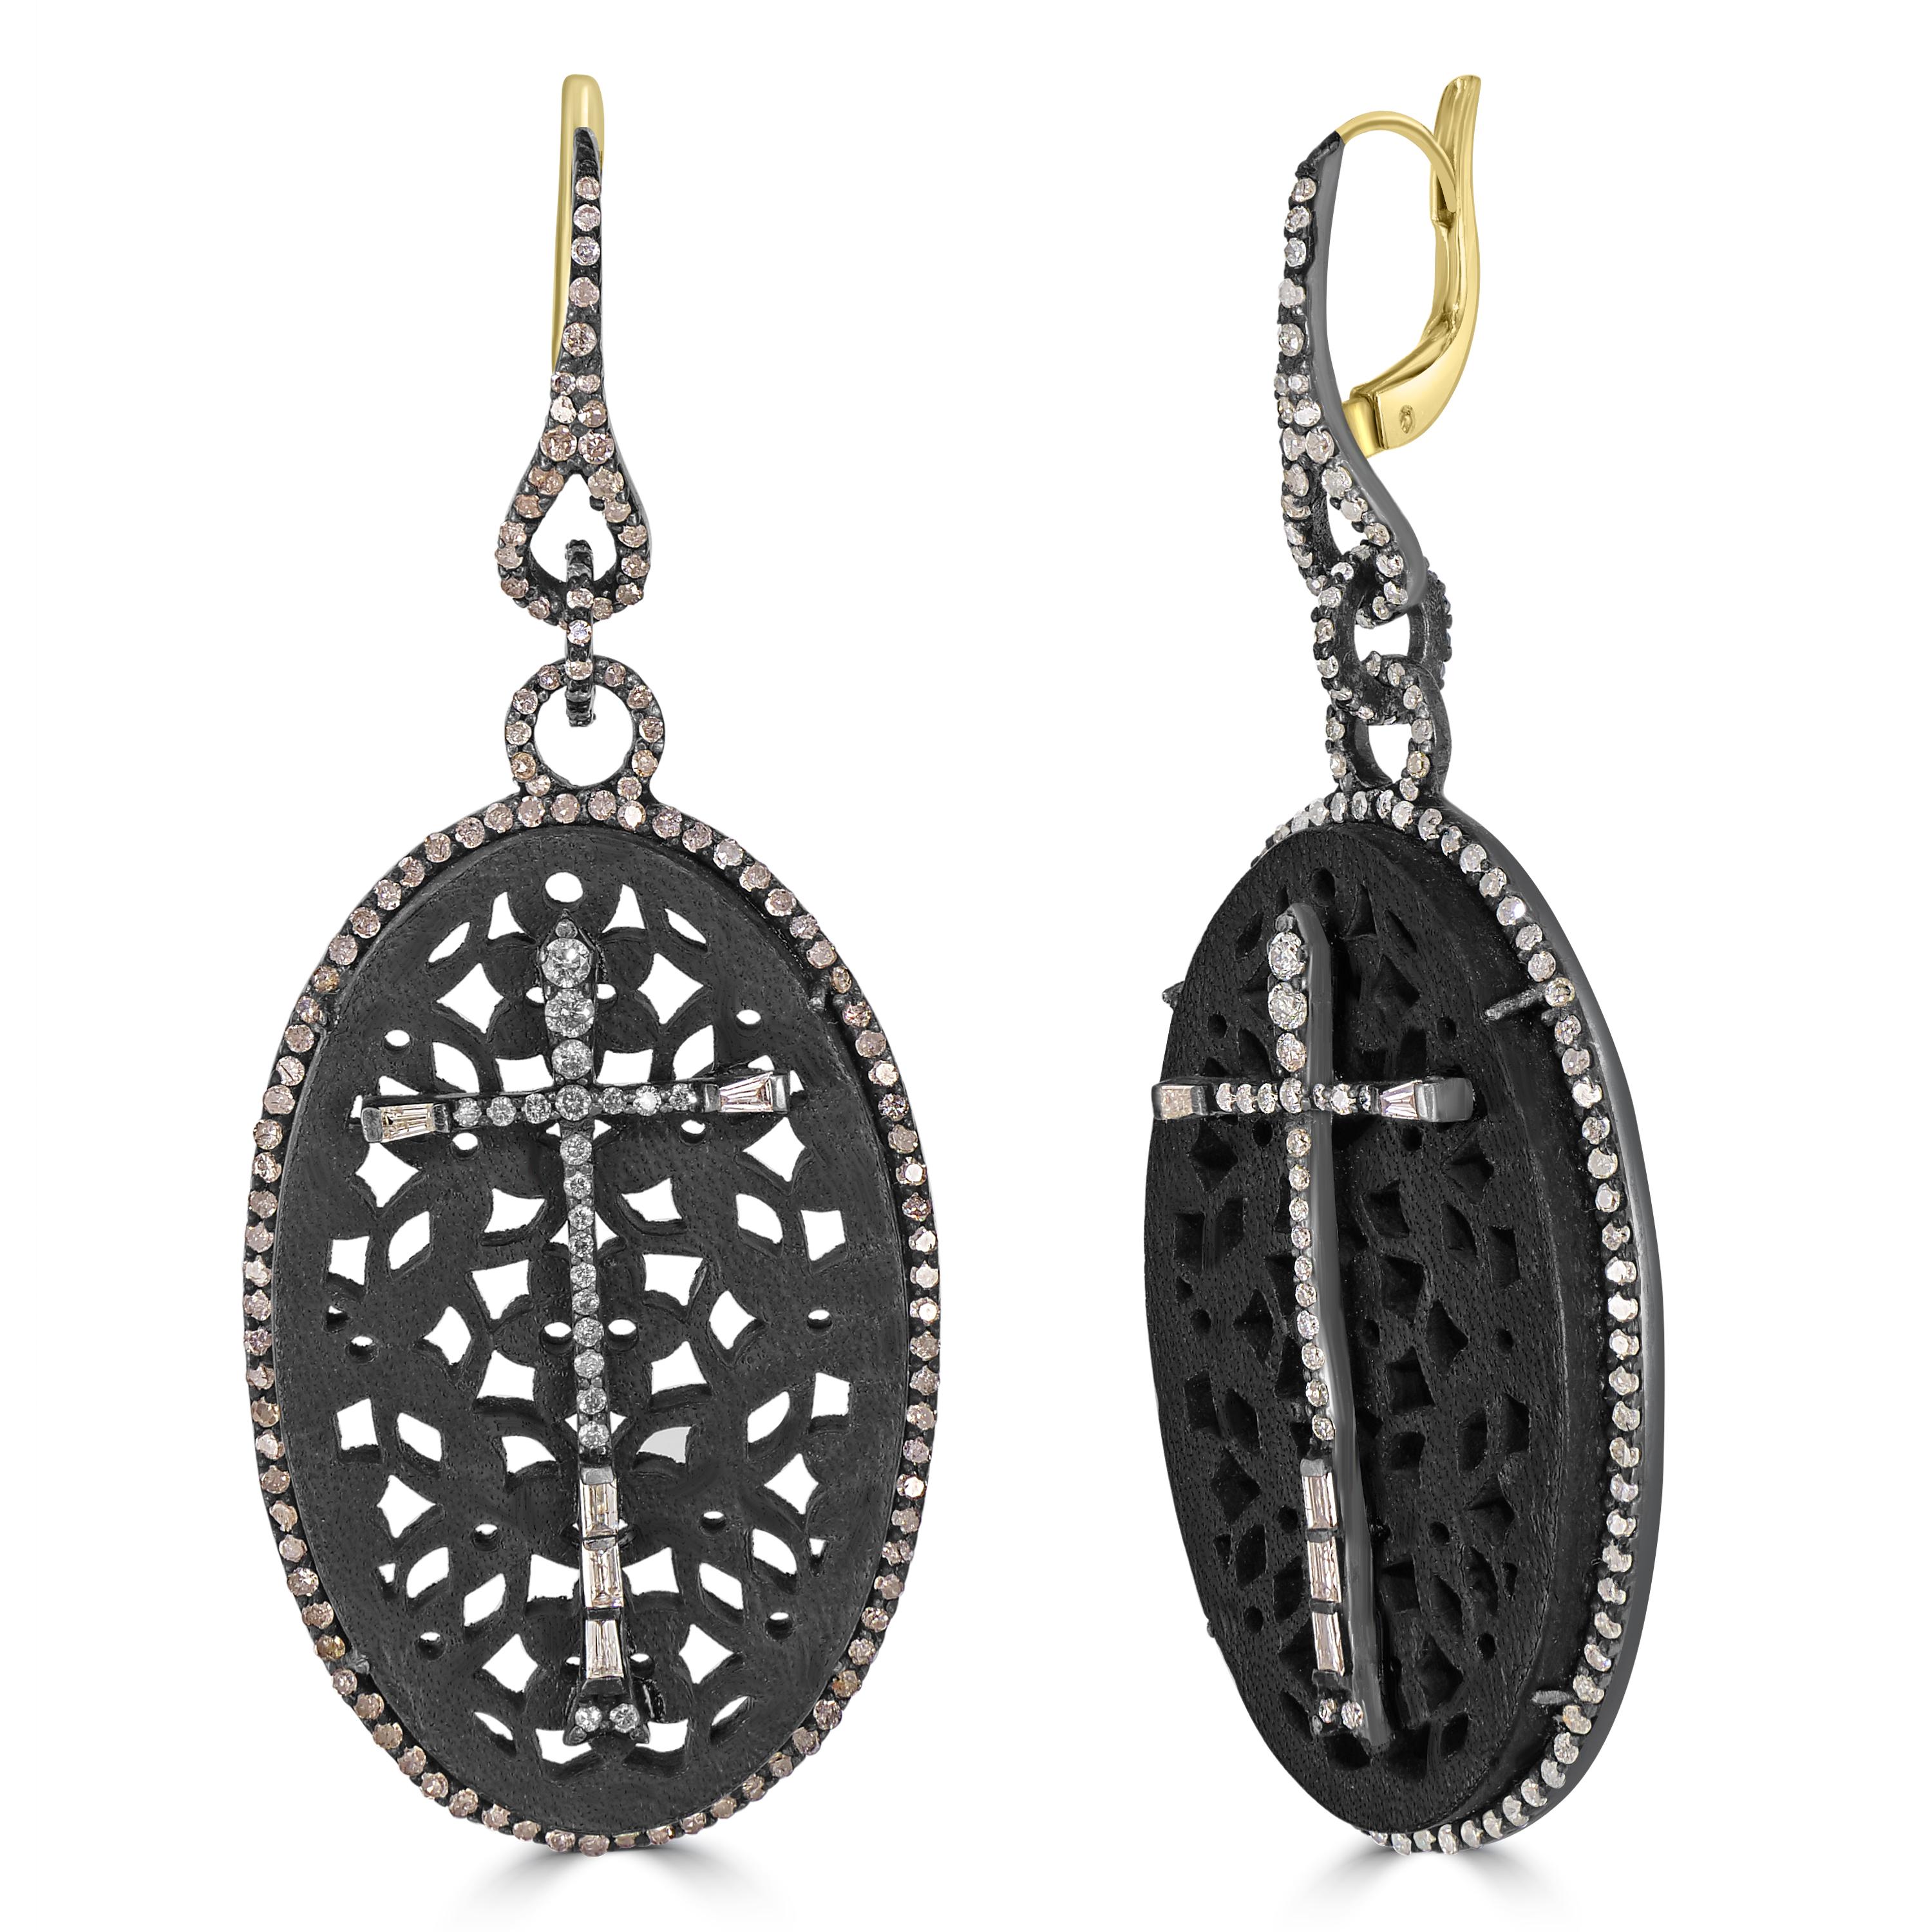 Dive into the allure of Victorian elegance with the 3.19 Cttw. Filigree Drop Earrings in 18k Gold and Sterling Silver. These exquisite earrings feature an oval drop crafted from luxurious black leather, adding a touch of sophistication and